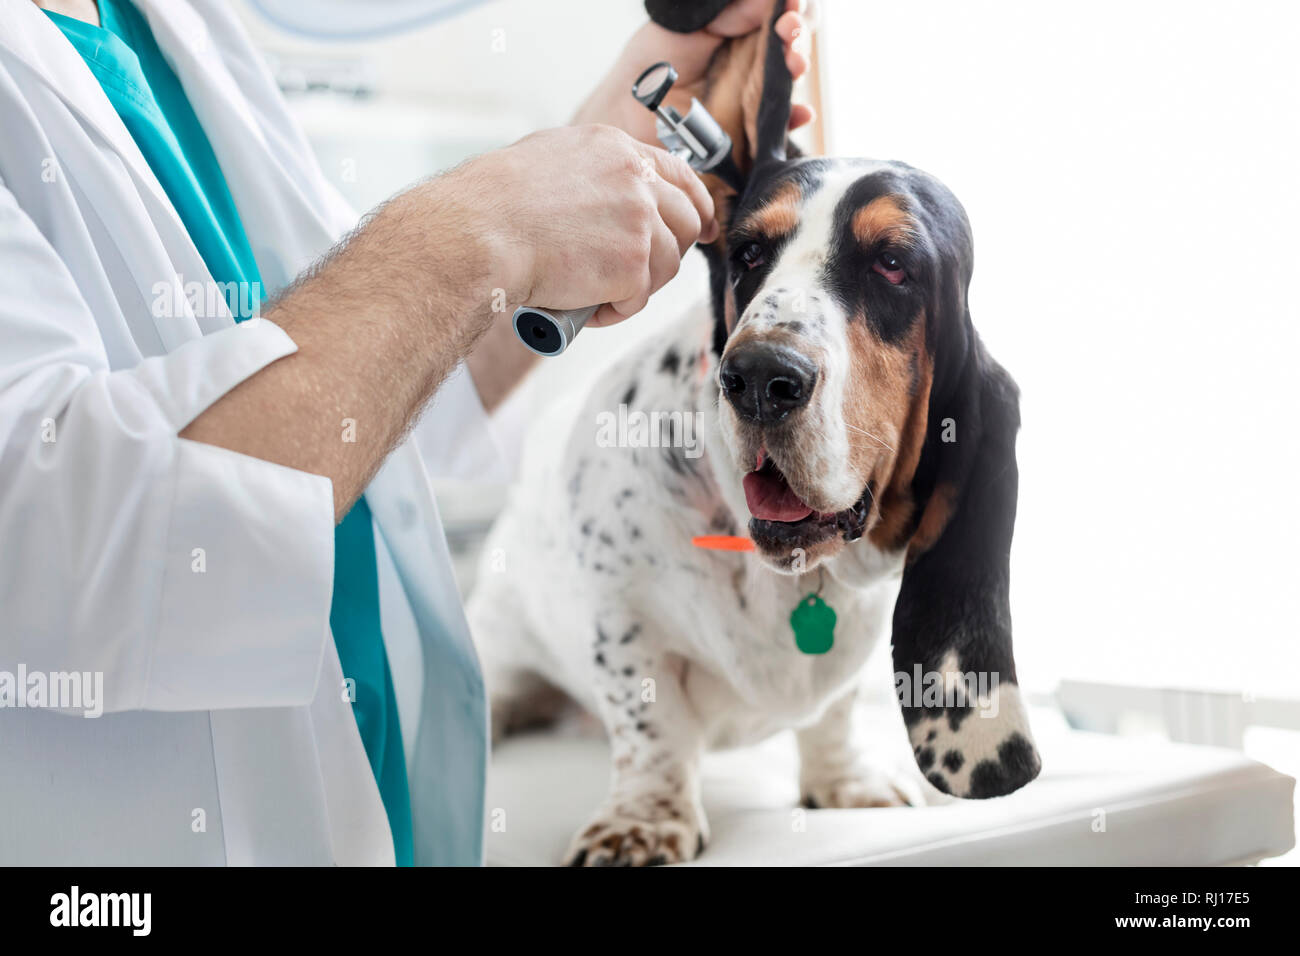 Midsection of doctor examining dog's ear with otoscope equipment at veterinary clinic Stock Photo